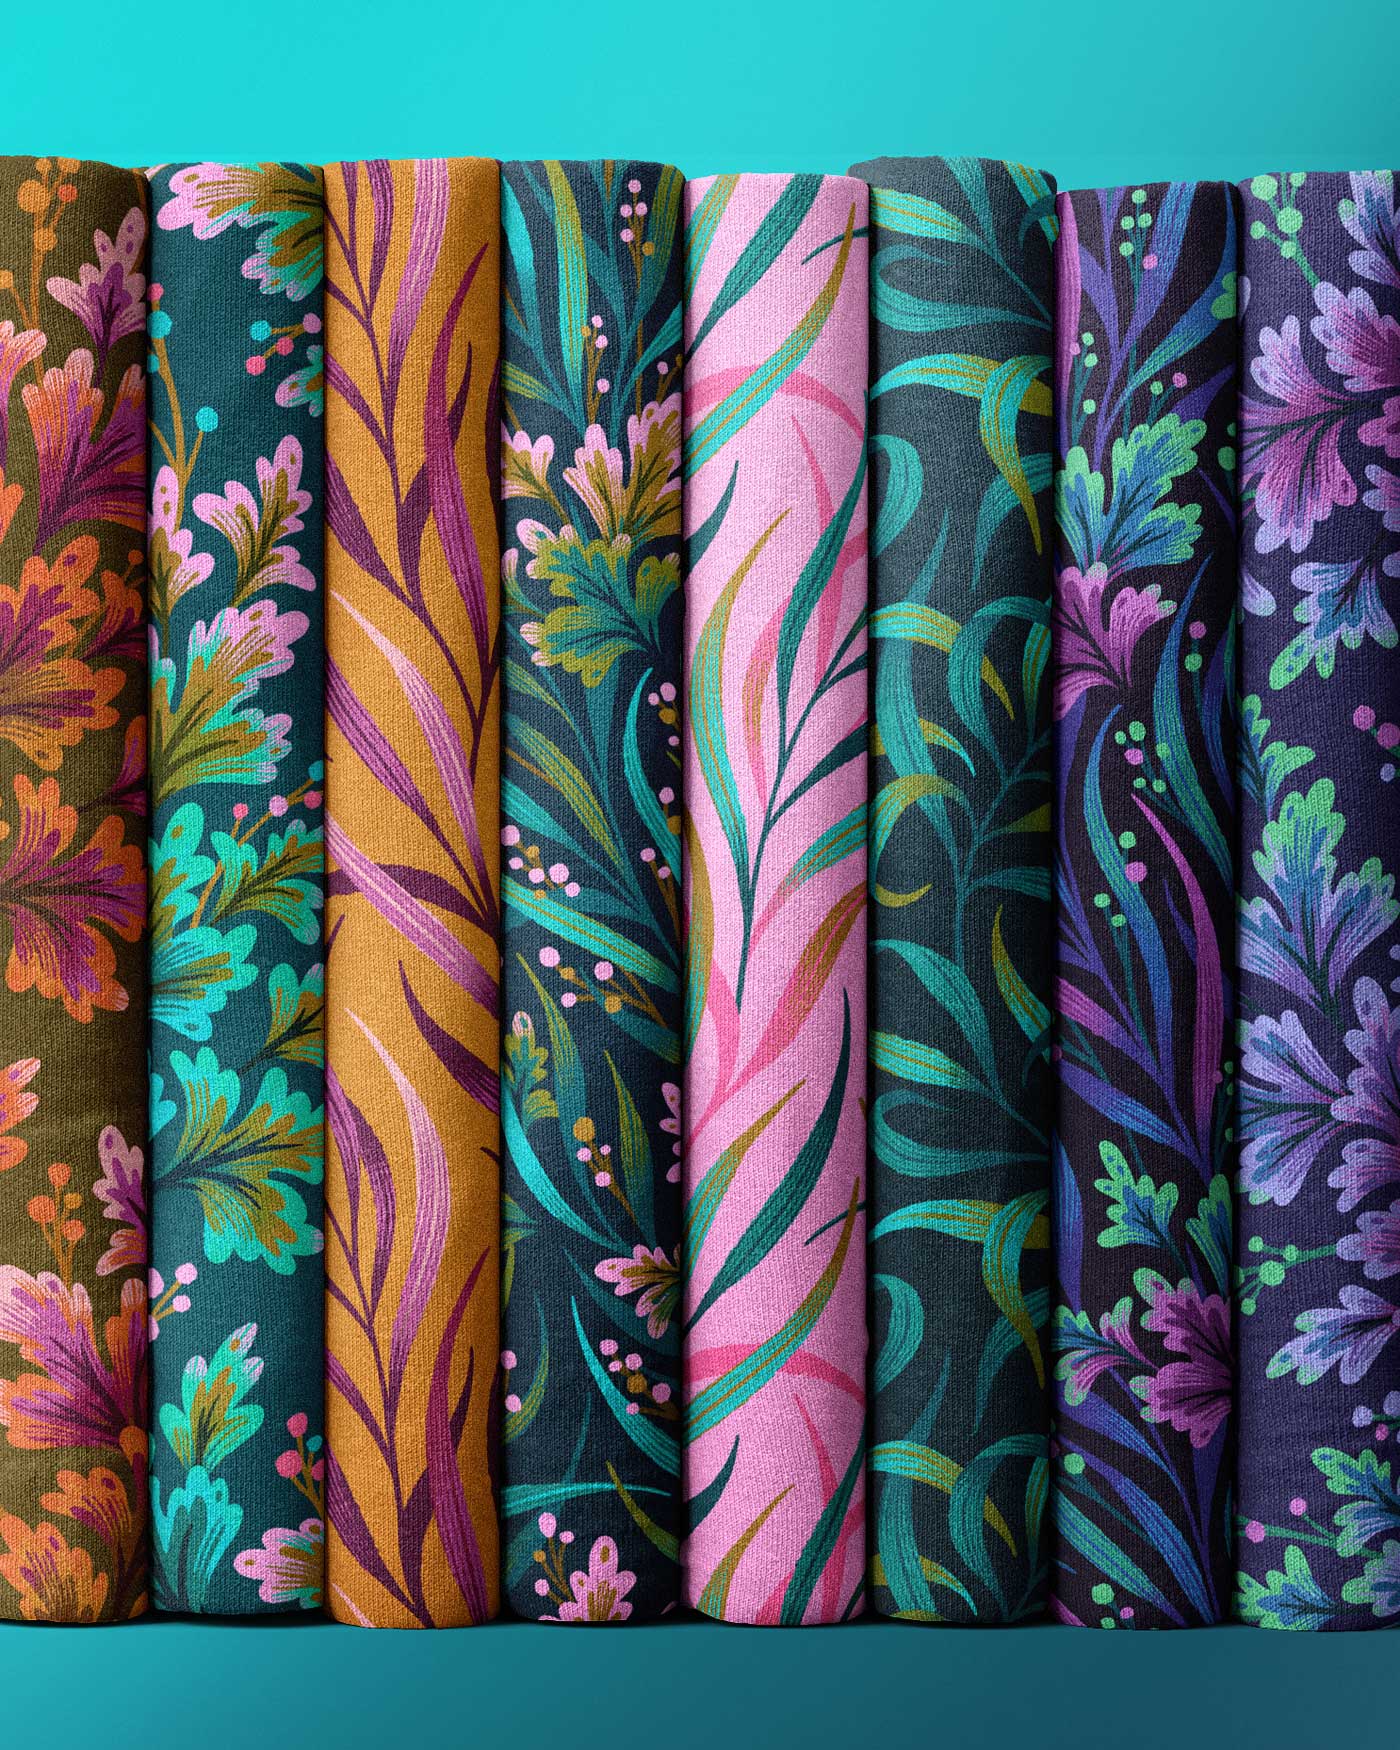 Fabric rolls collection of foliage patterns in green, pink and purple by Andrea Muller